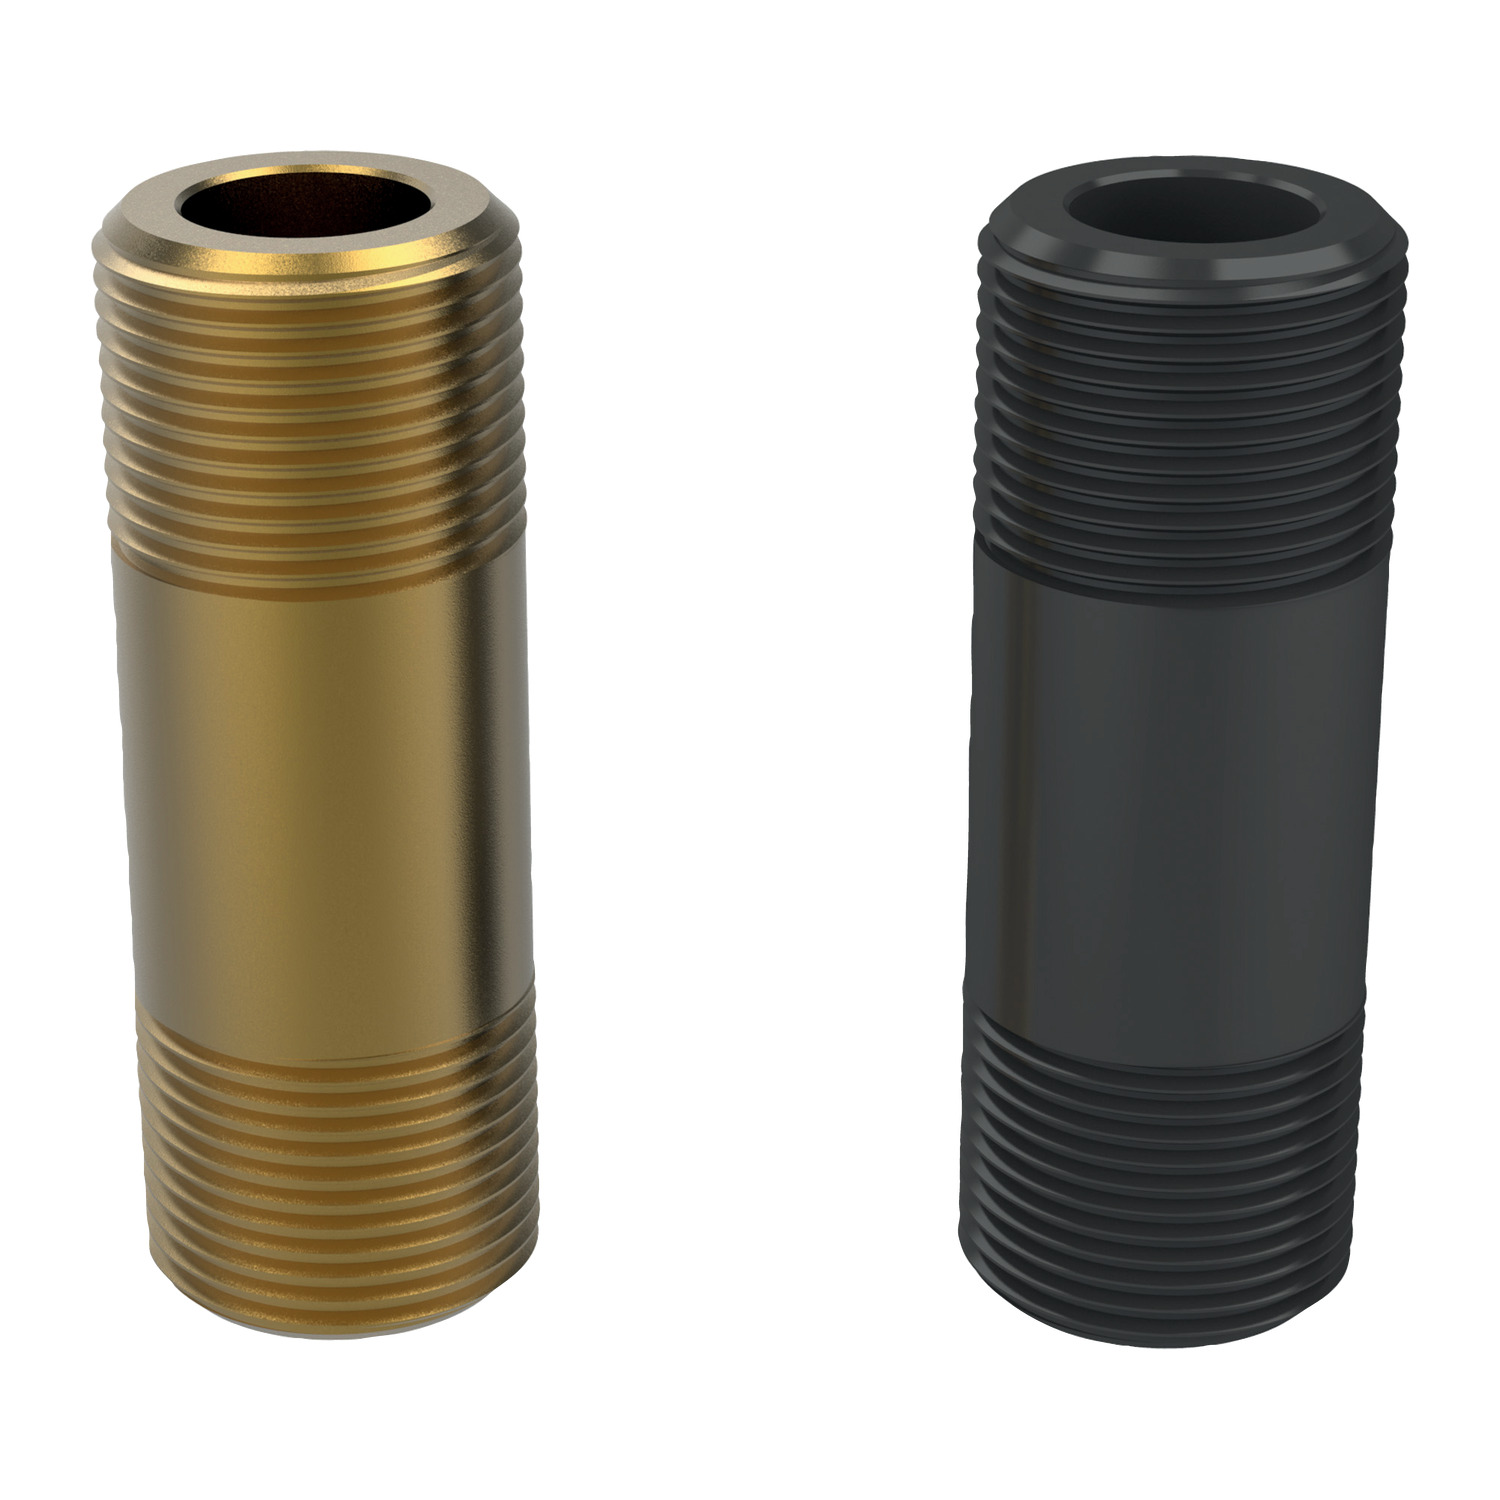 Product 20034, Fittings Connectors - Dual Fit for coolant nozzle systems / 